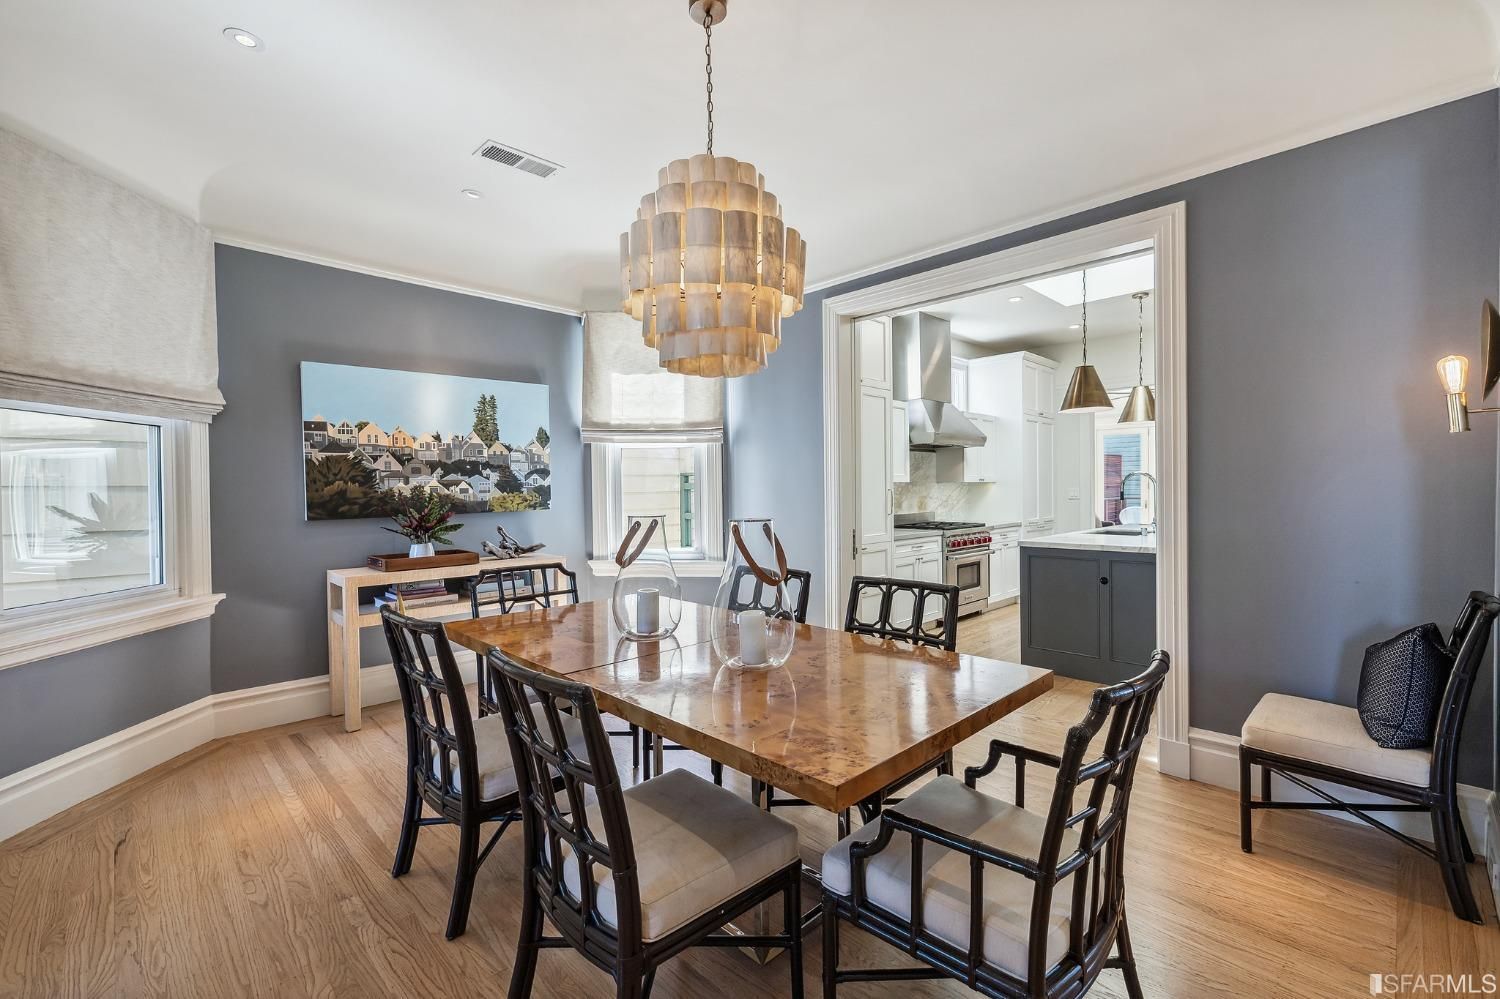 Property Photo: Formal dining room showing a large chandelier and wood floors